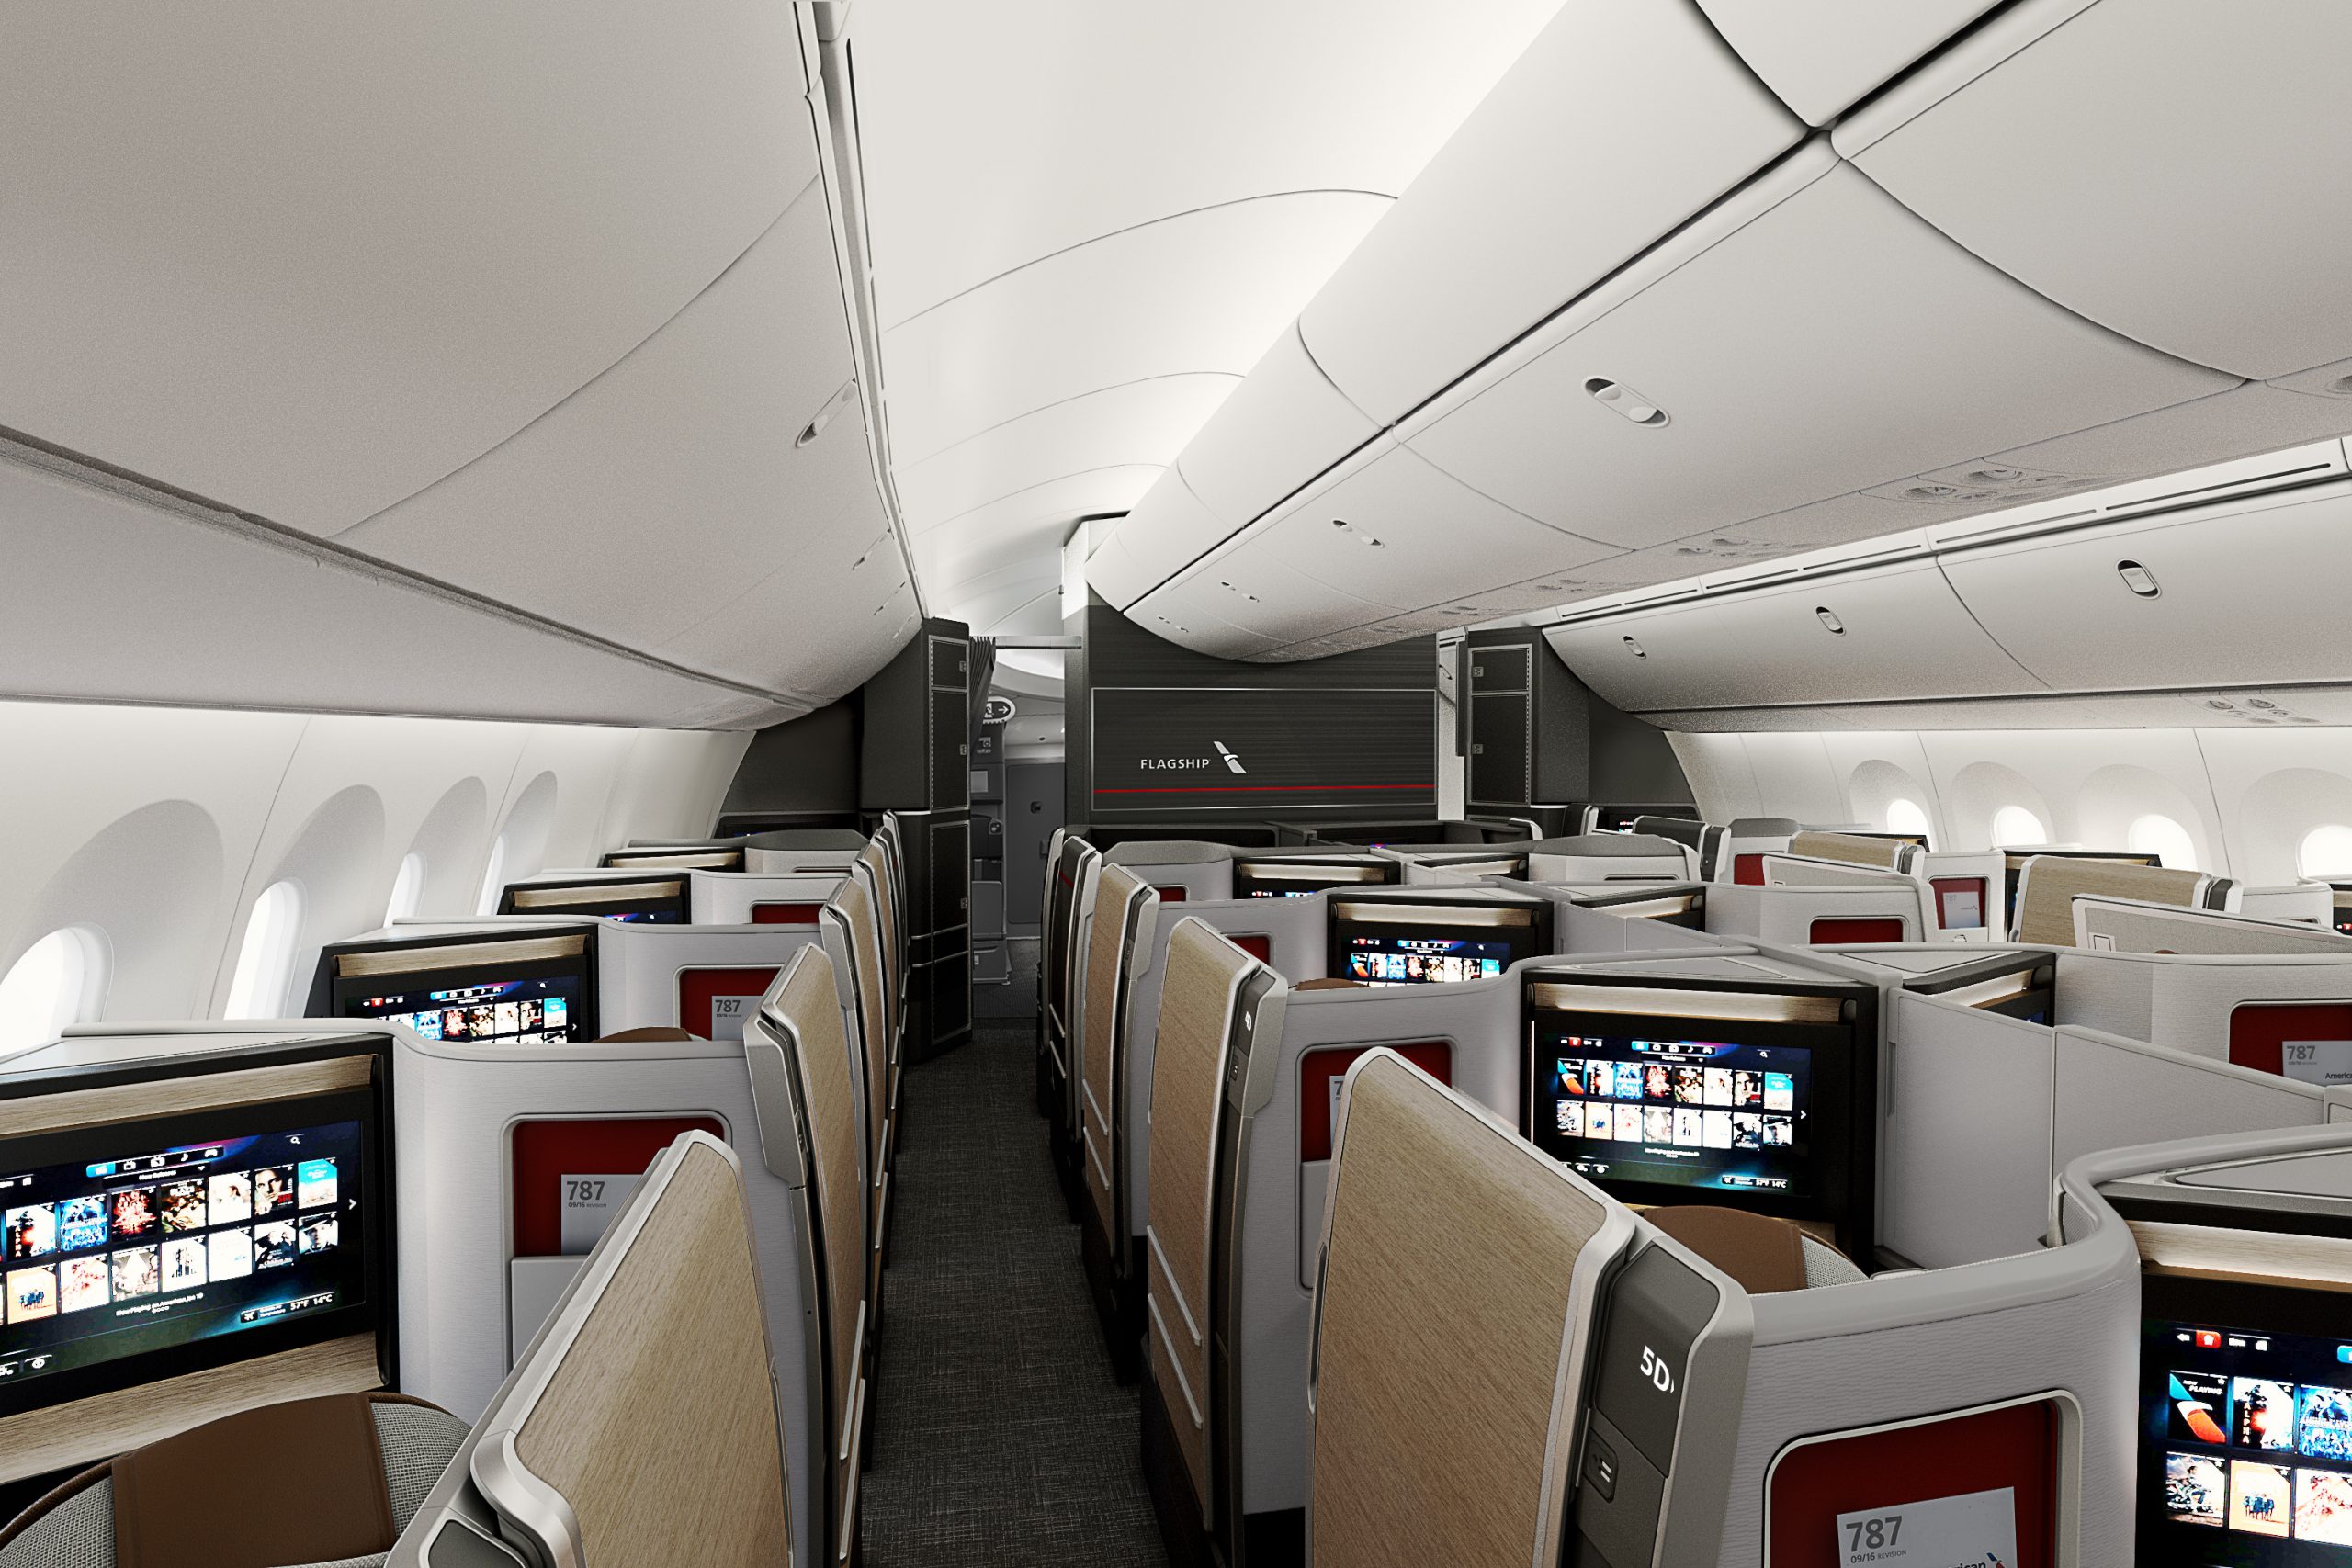 In Pictures: American Airlines Teases First Look at New Flagship Suite Seats With Privacy Doors